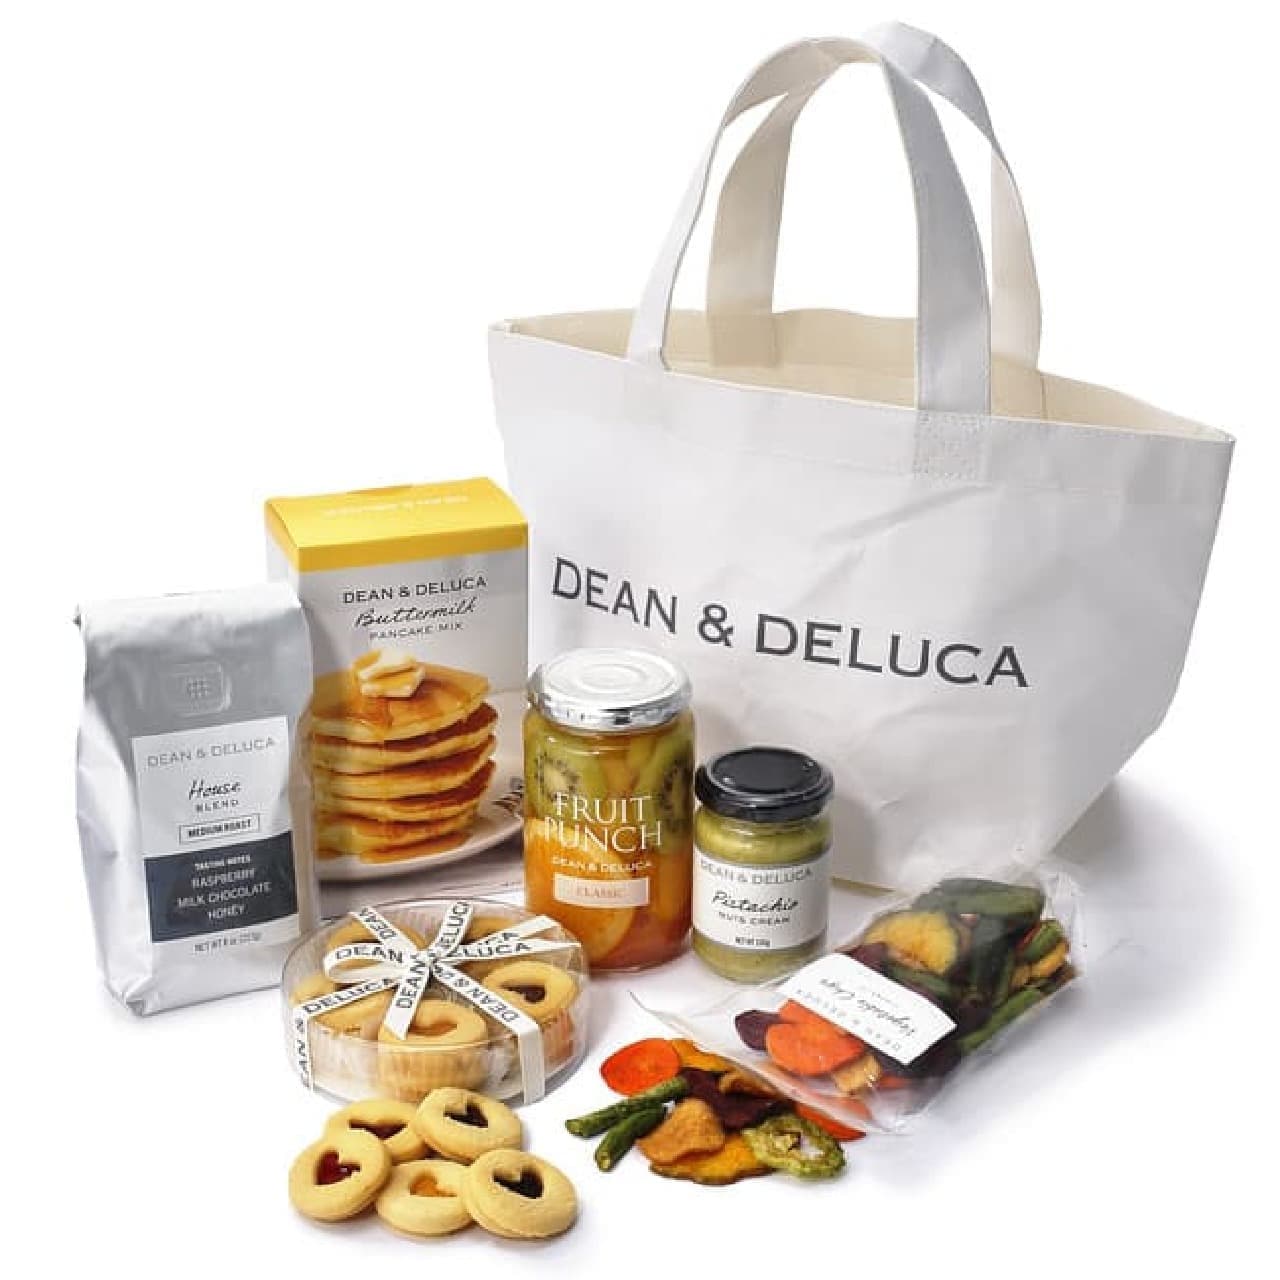 DEAN & DELUCA Lucky bag 2022 --Three kinds of coffee goods assortment! Comes in a paper package that becomes a sub-bag